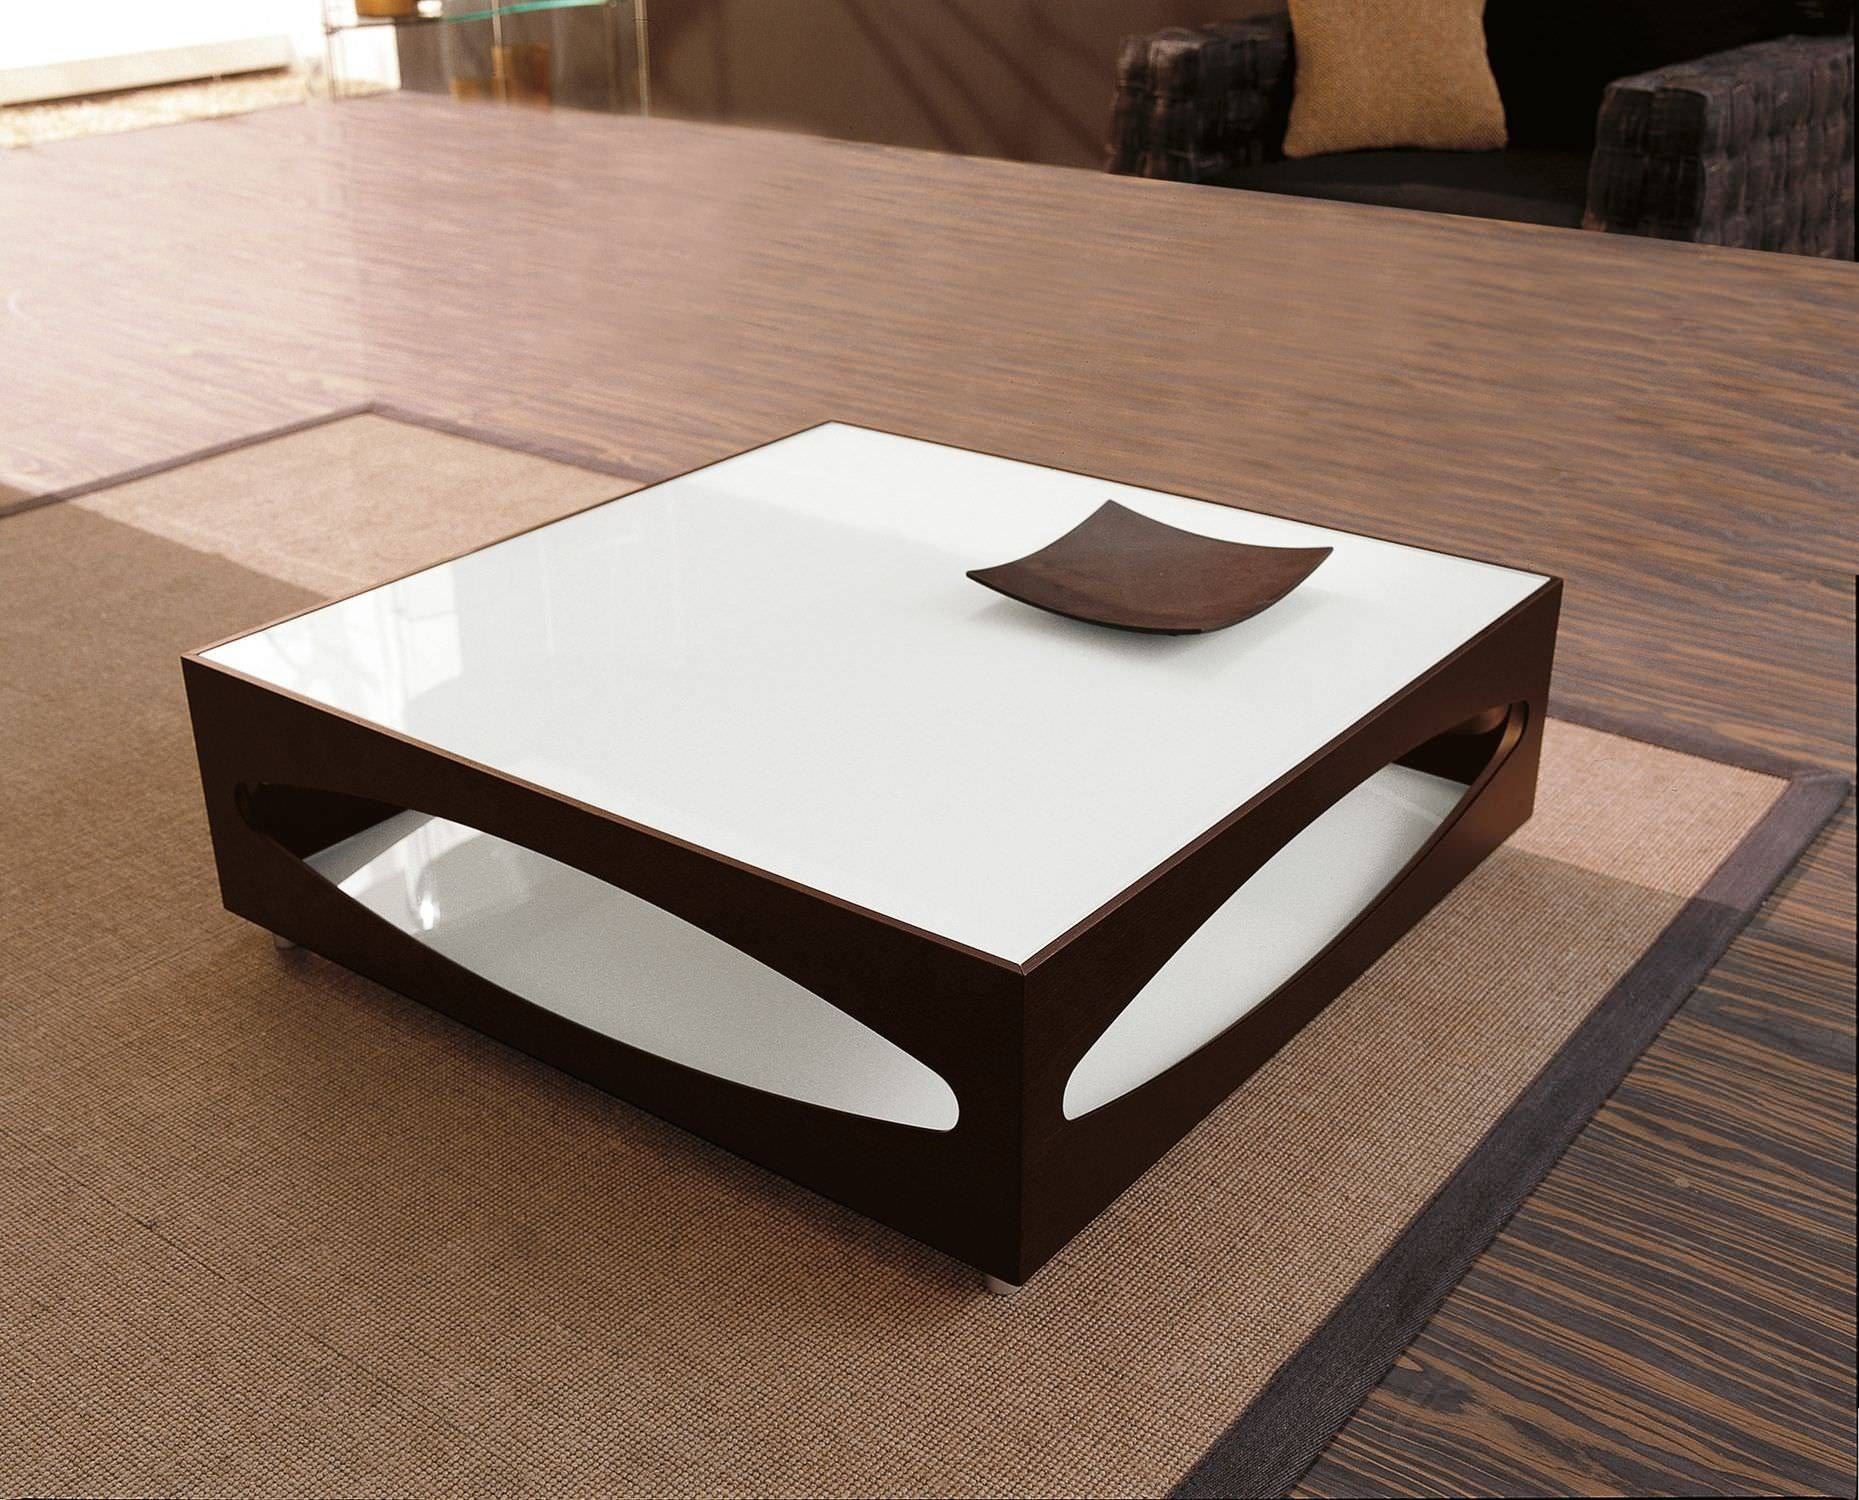 The Most Inspired Unique Contemporary Coffee Tables Ideas Throughout Contemporary Coffee Table (View 9 of 30)